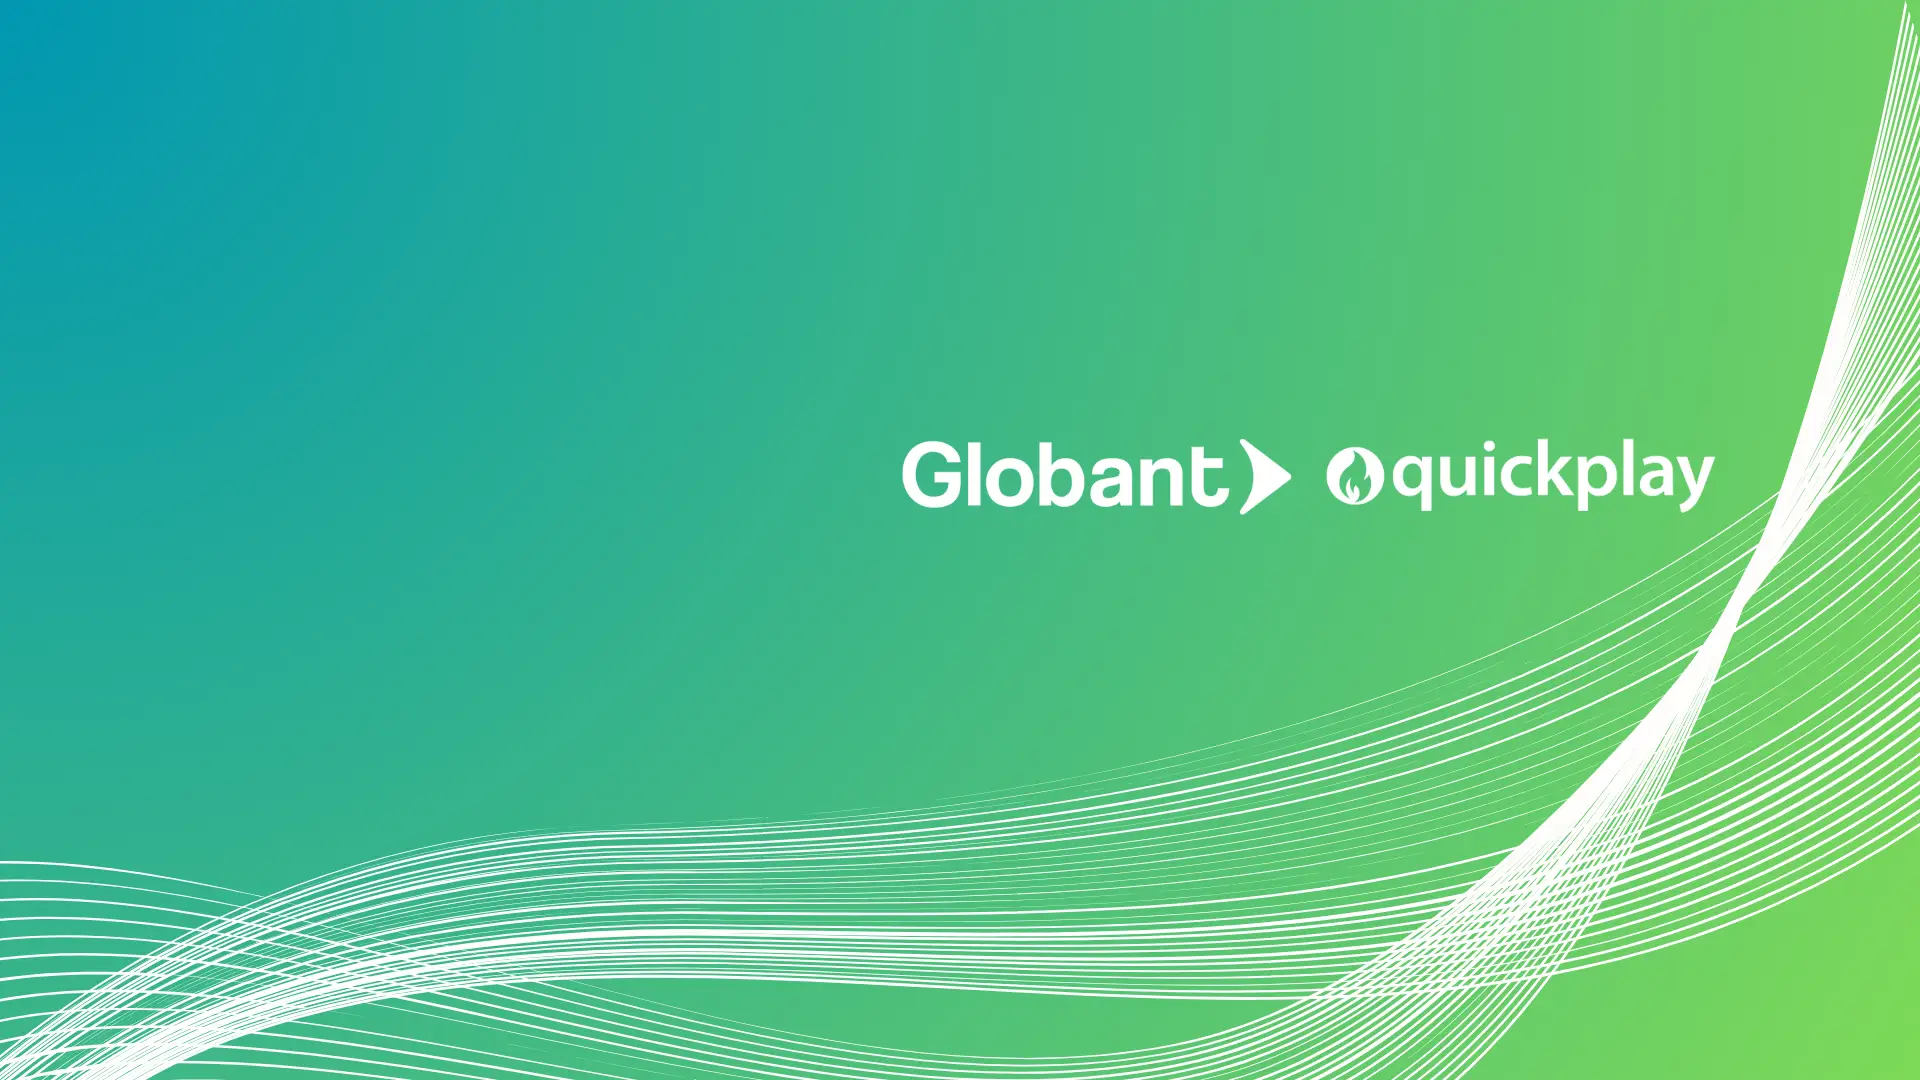 Globant and Quickplay Launch “Media Archive AI” to Create New Generative AI-Powered Engagement and Monetization Opportunities Using Archival Content